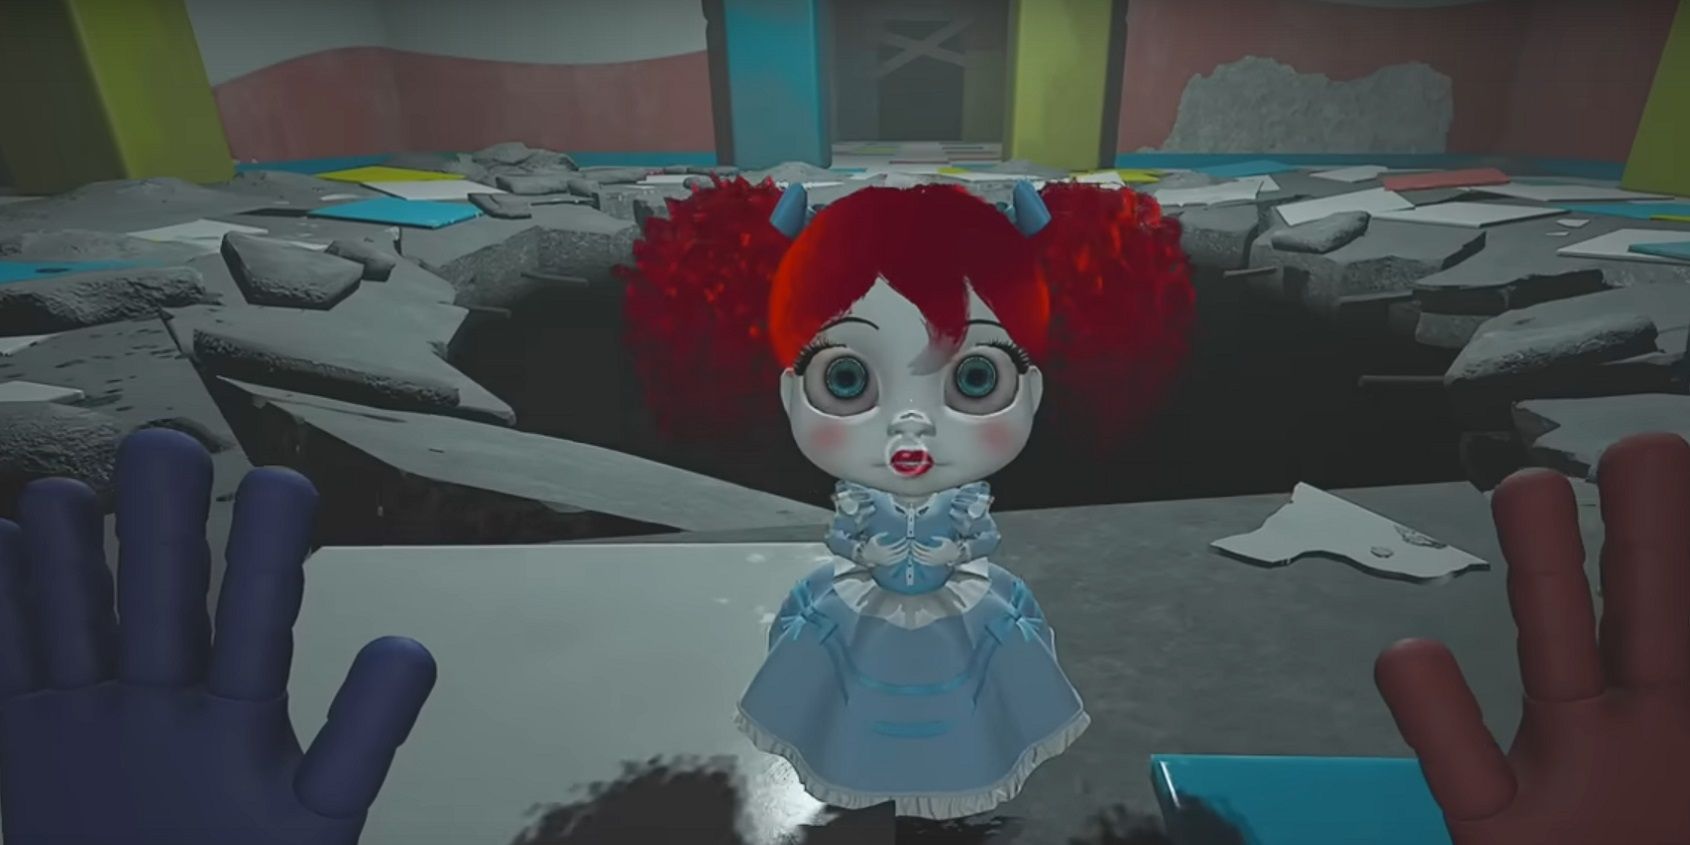 Poppy Playtime' is a suspenseful beast - until it's done playing